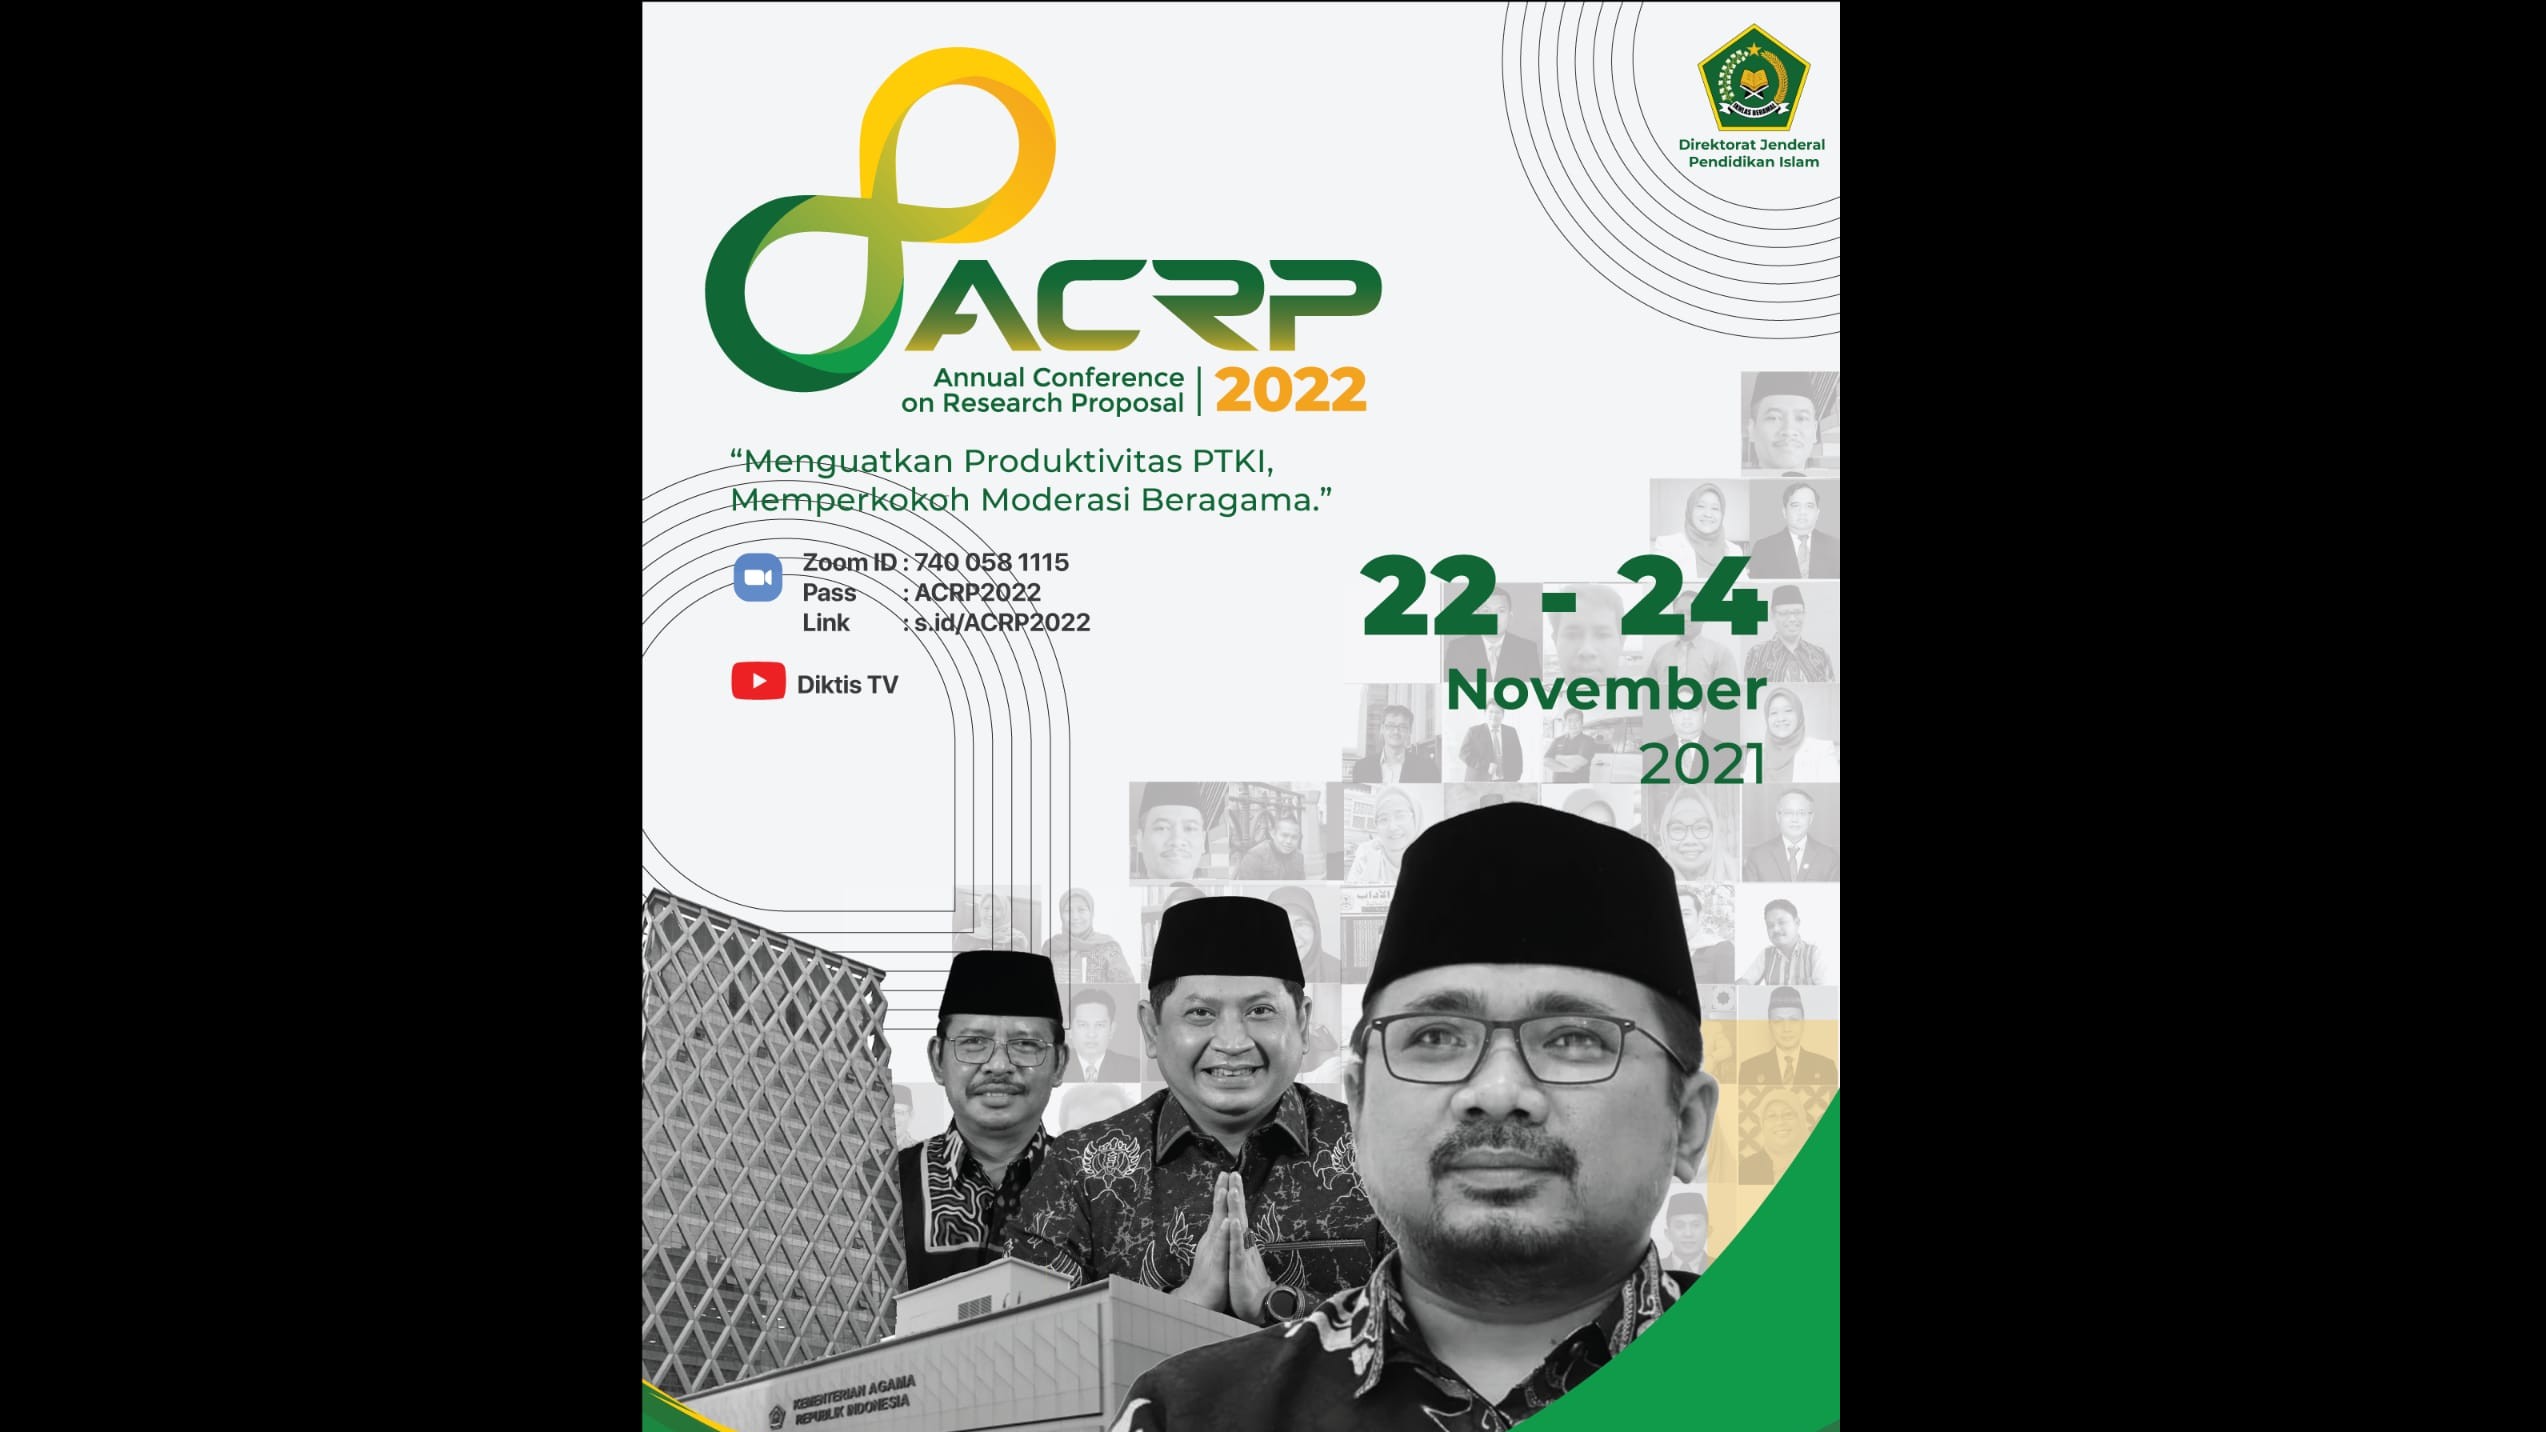 Annual Conference on Research Proposal (ACRP)